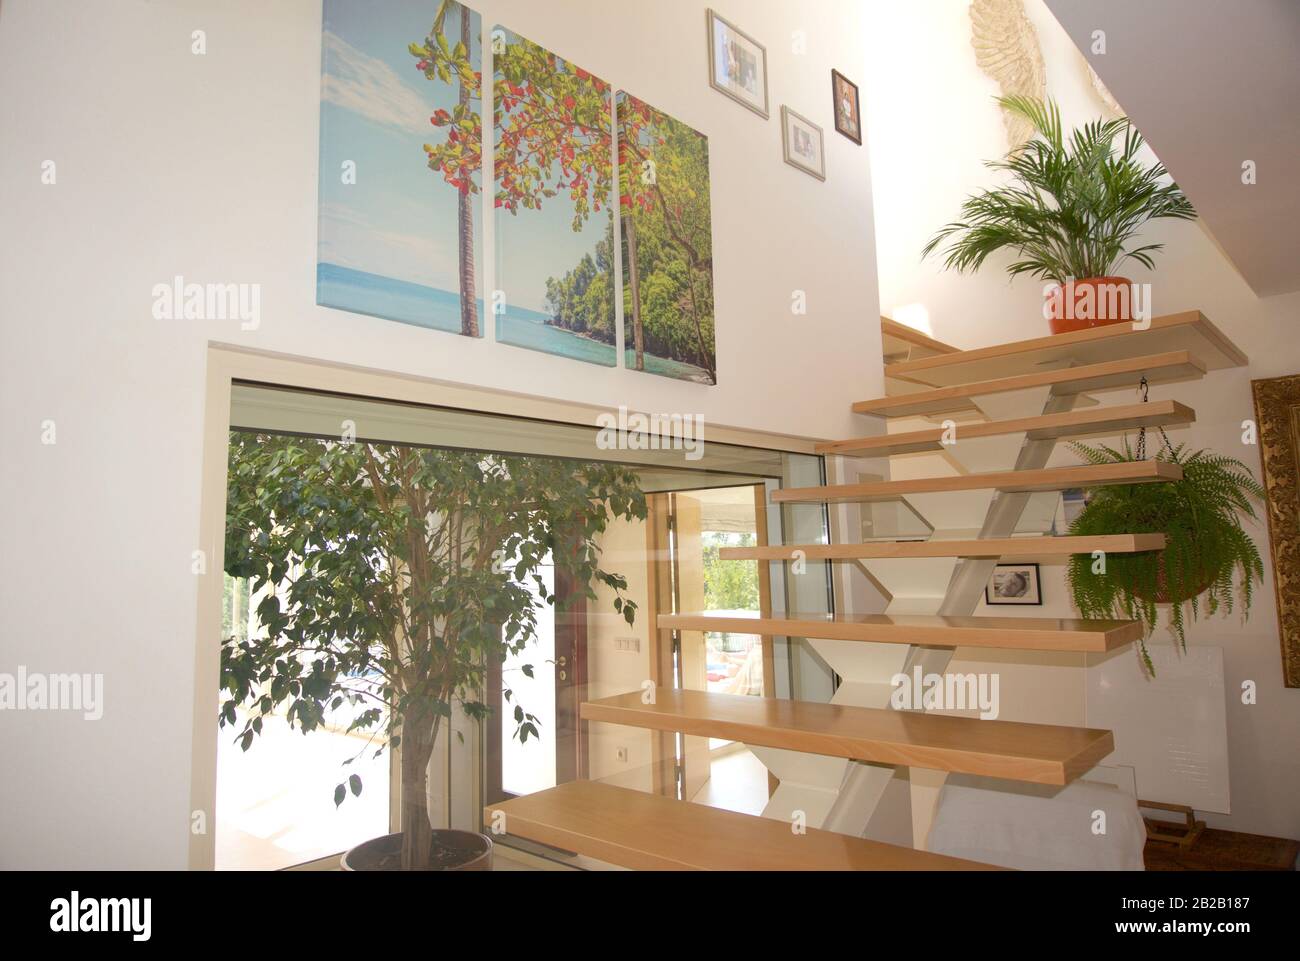 Modern interior with staircase Stock Photo